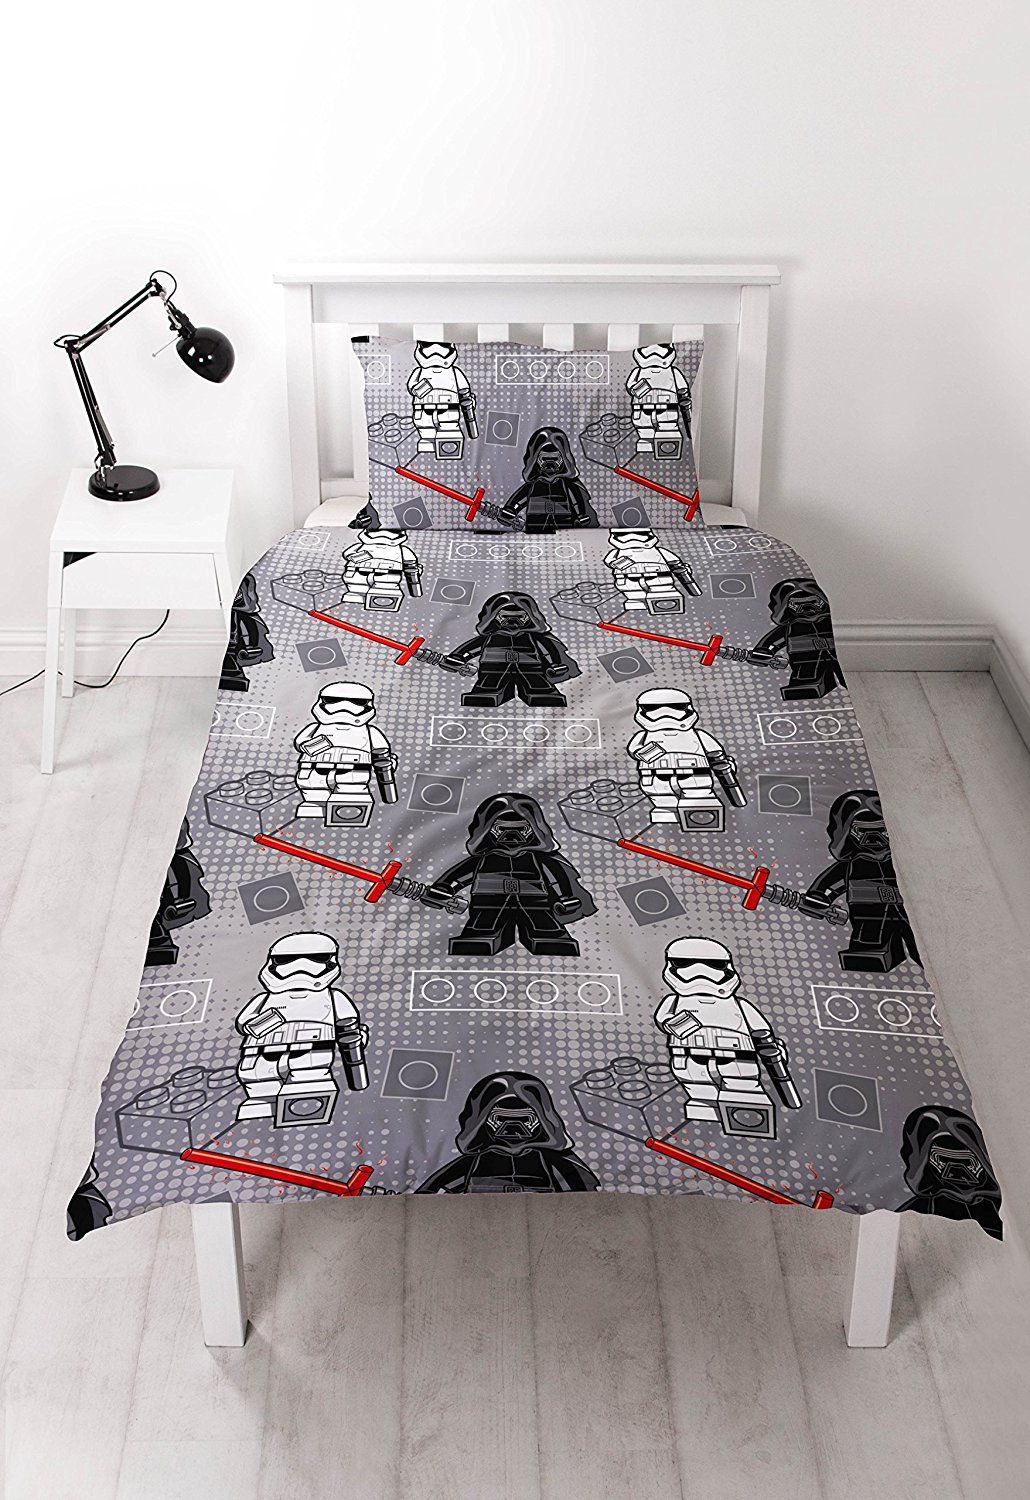 Lego Star Wars 'Seven' Rotary Single Bed Duvet Quilt Cover Set